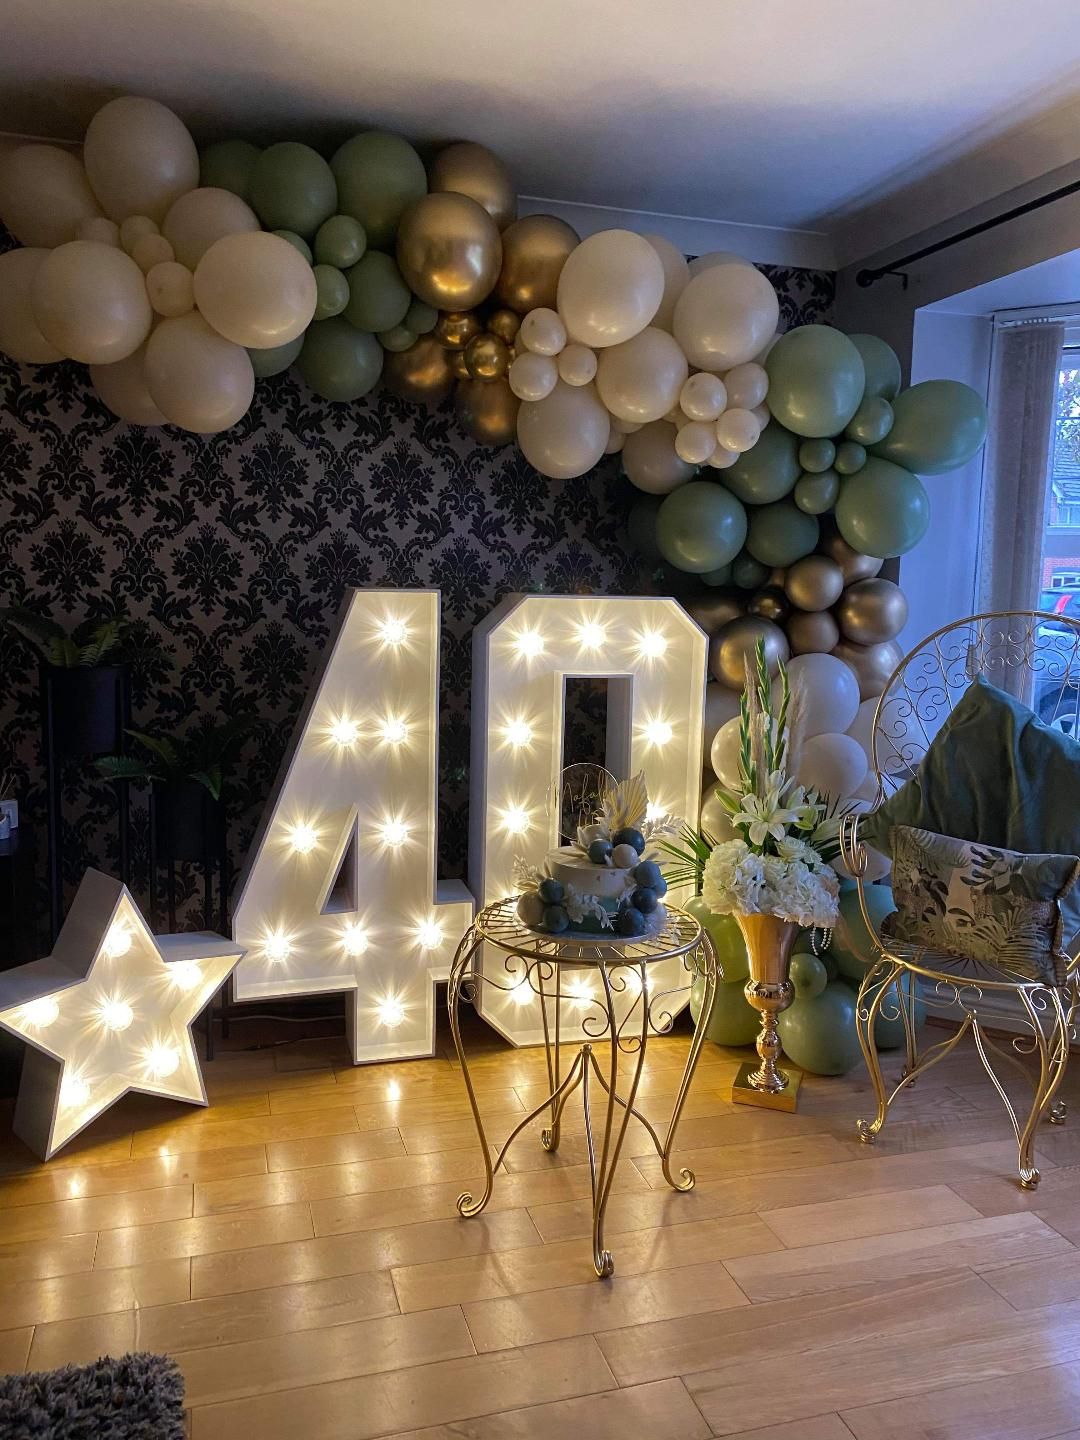 Light up LED numbers for a 40th birthday with small light up star and organ